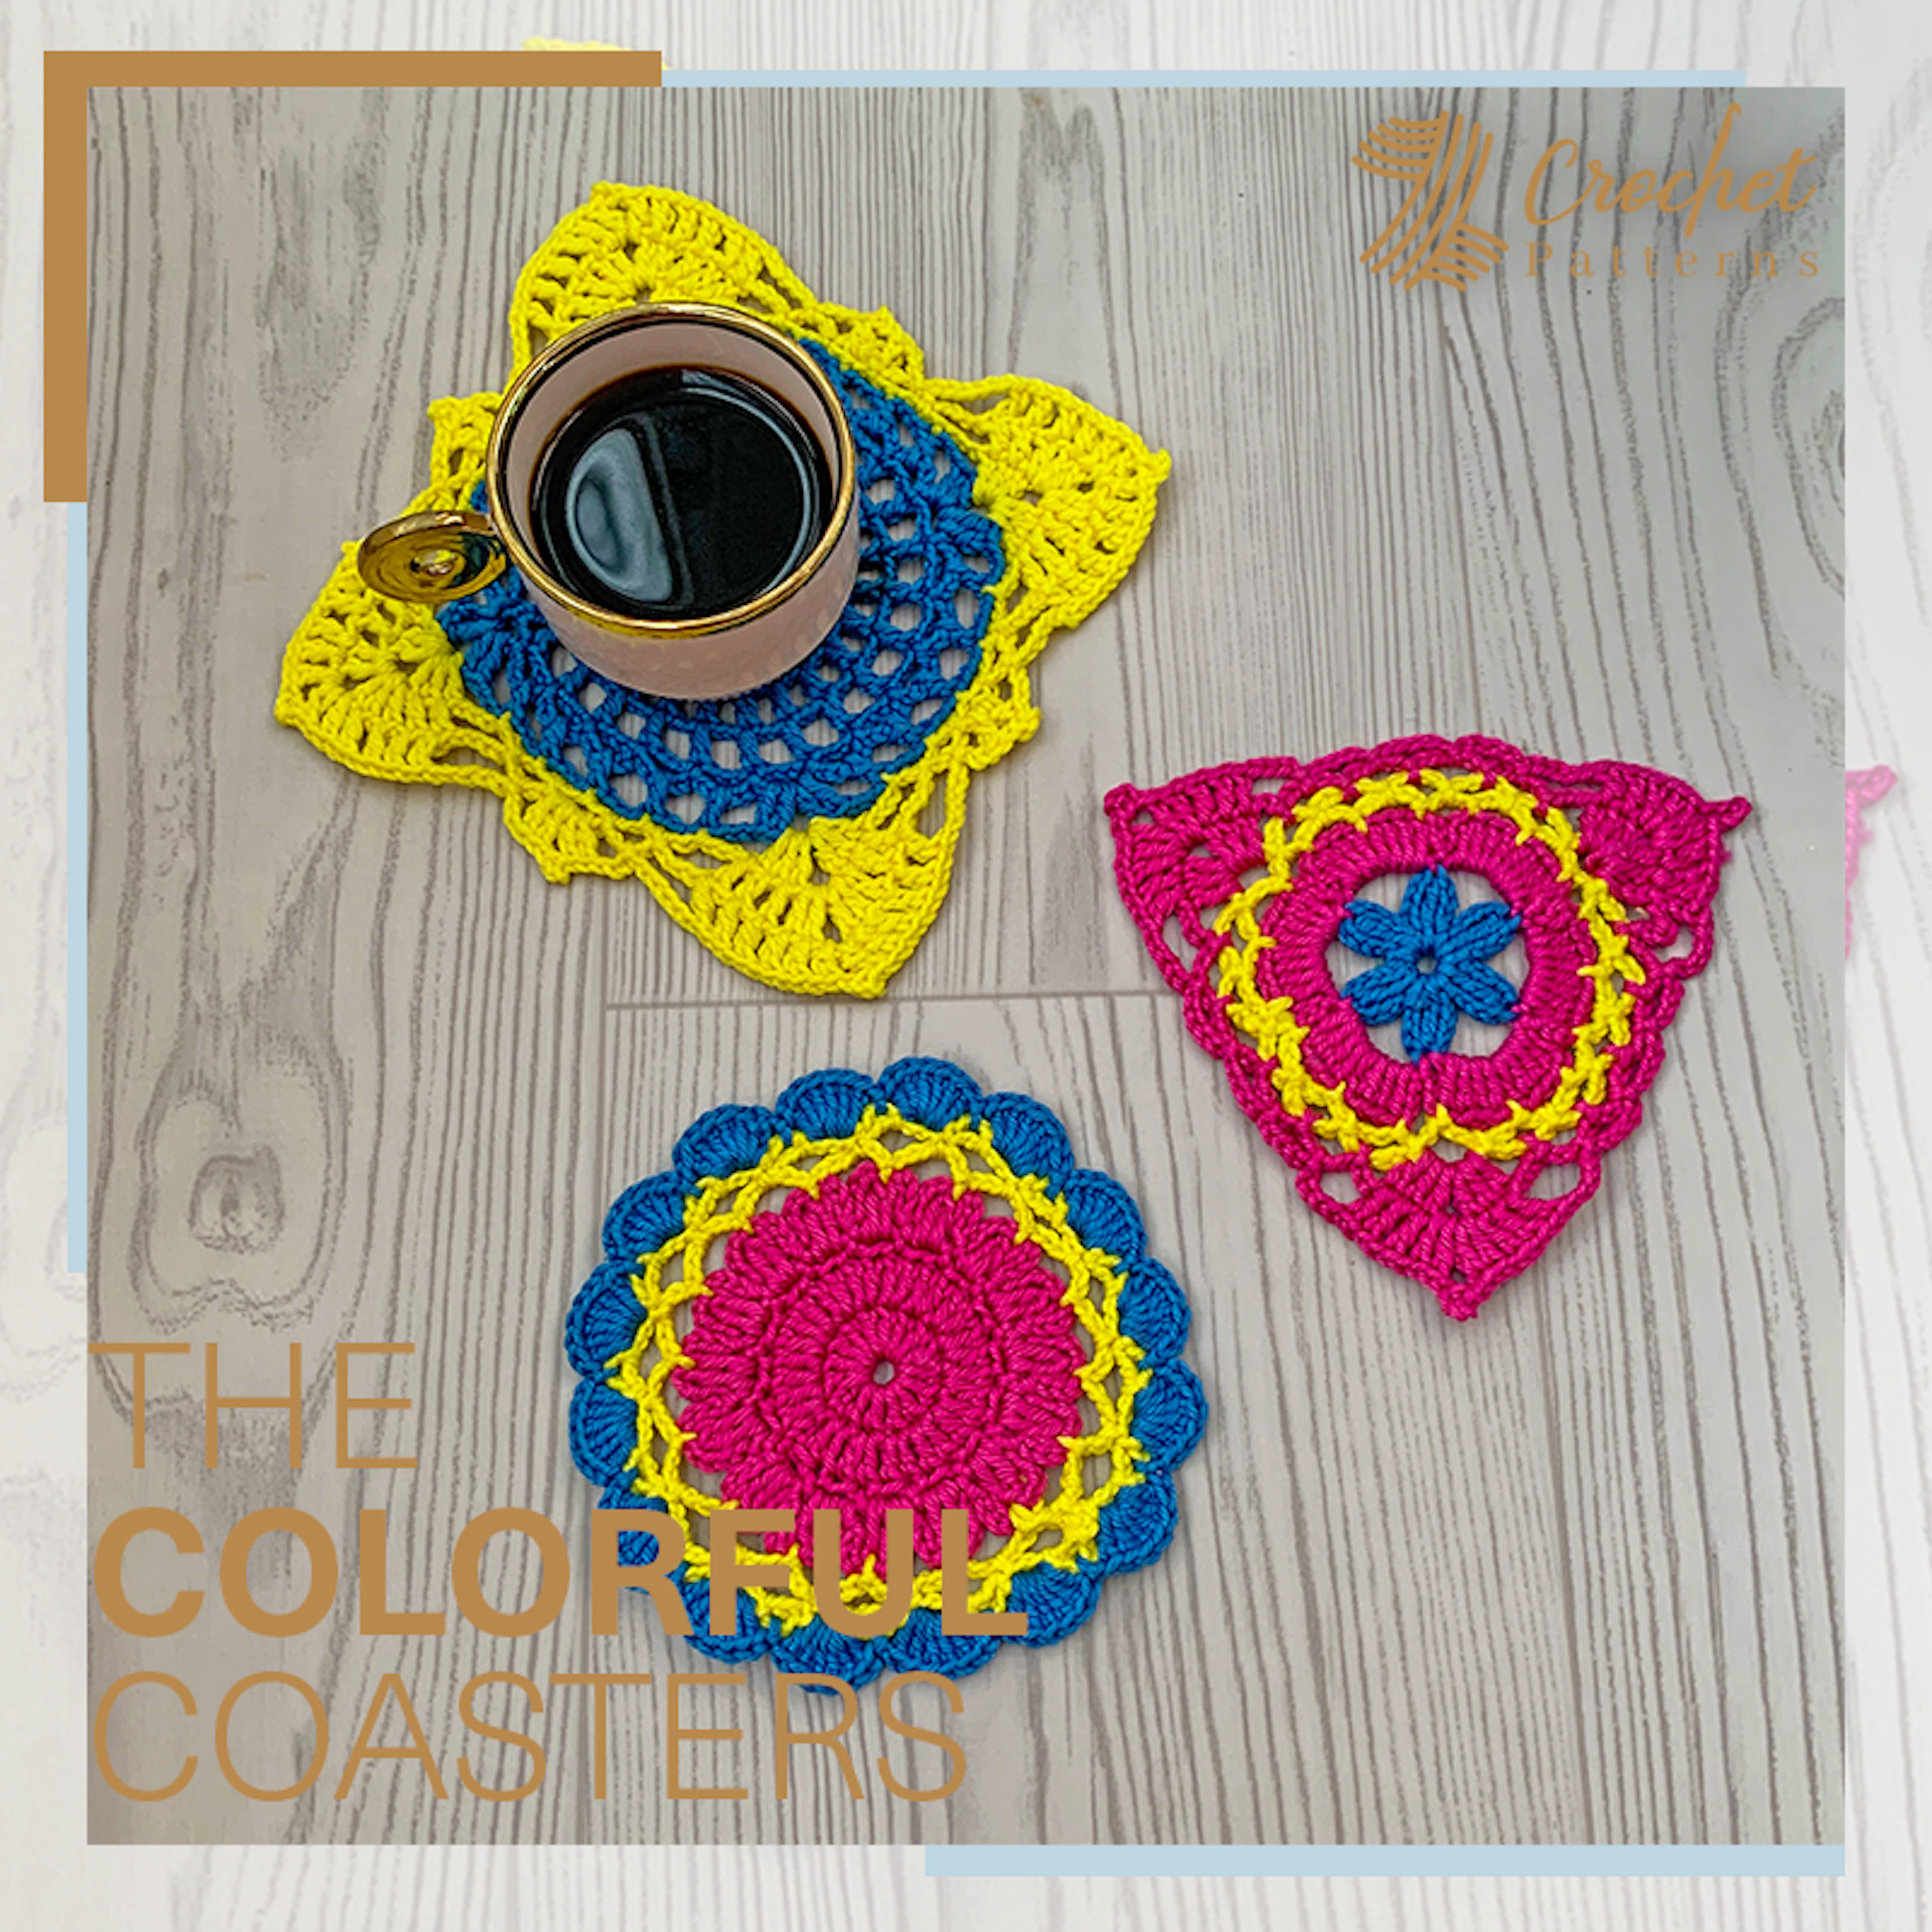 COLORFUL COASTERS PATTERN CHART 